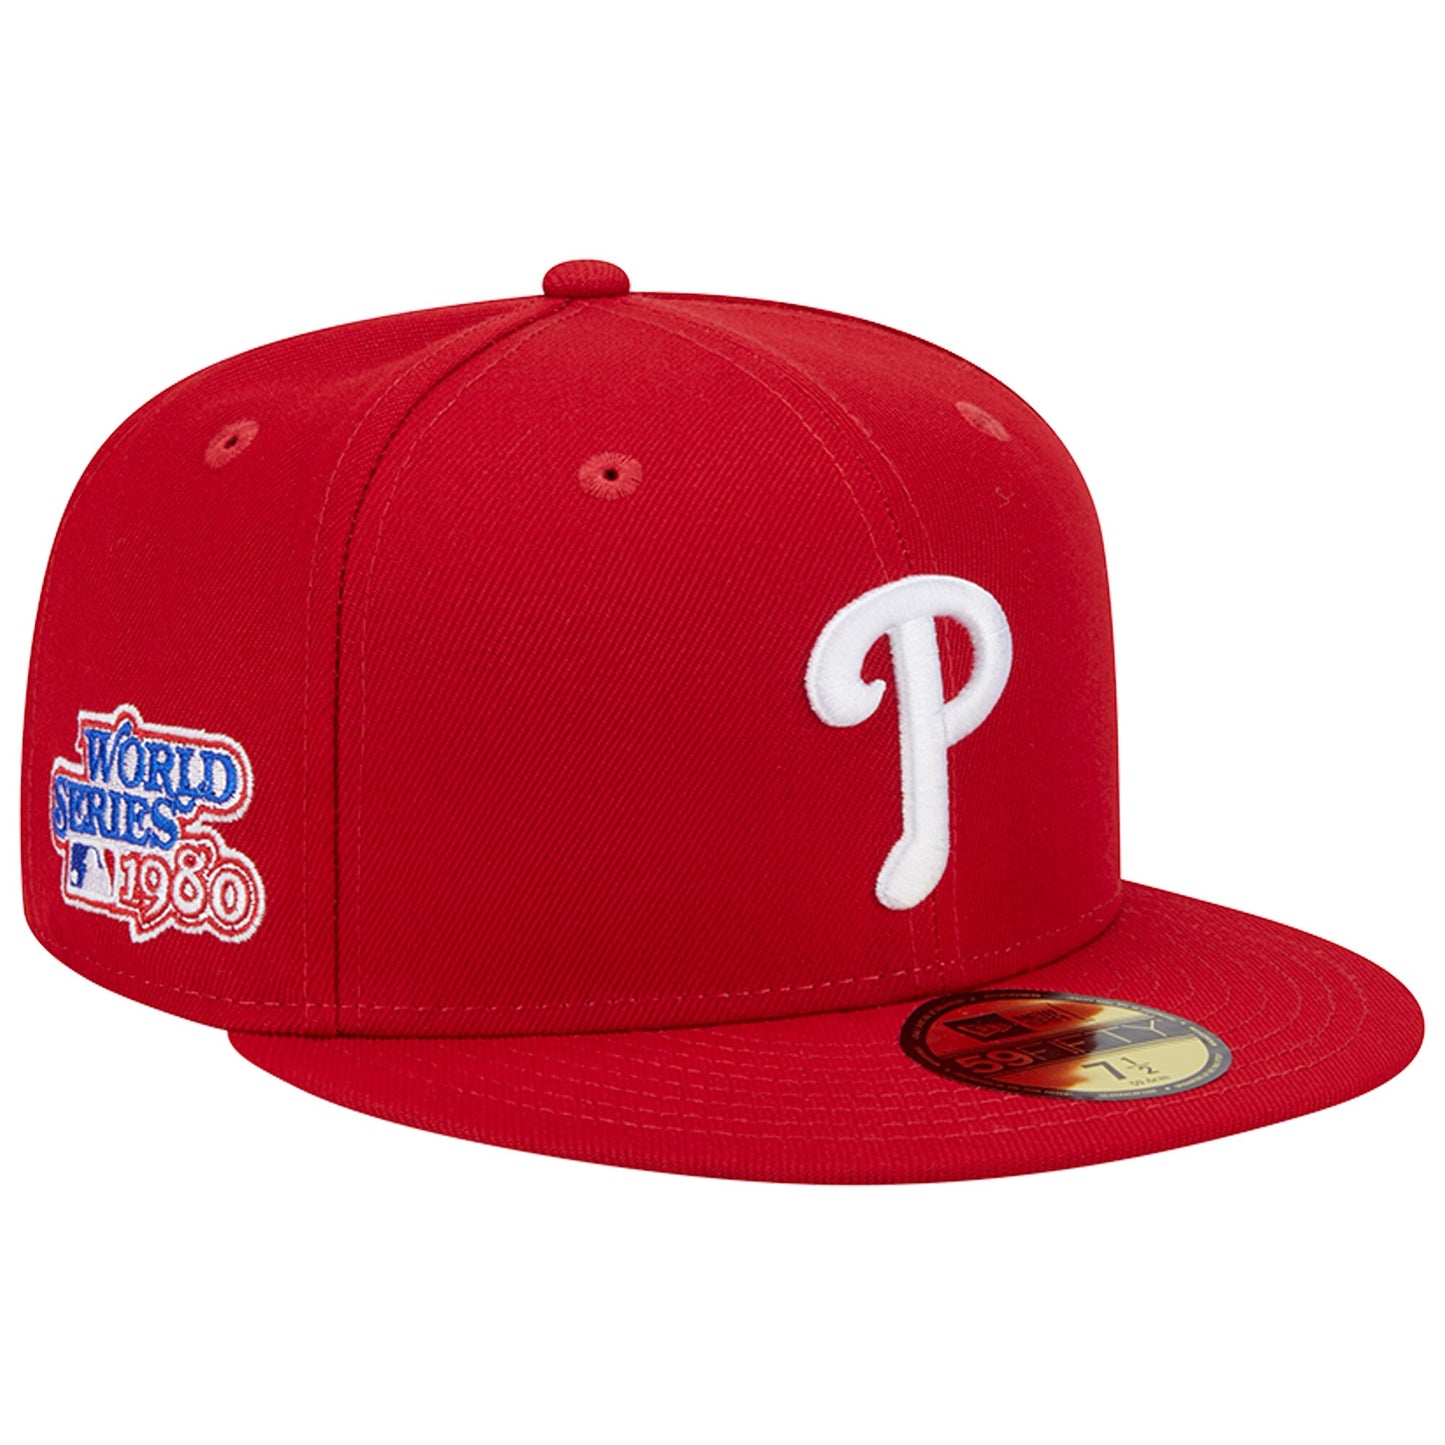 Philadelphia Phillies New Era 1980 World Series Team Color 59FIFTY Fitted Hat - Red